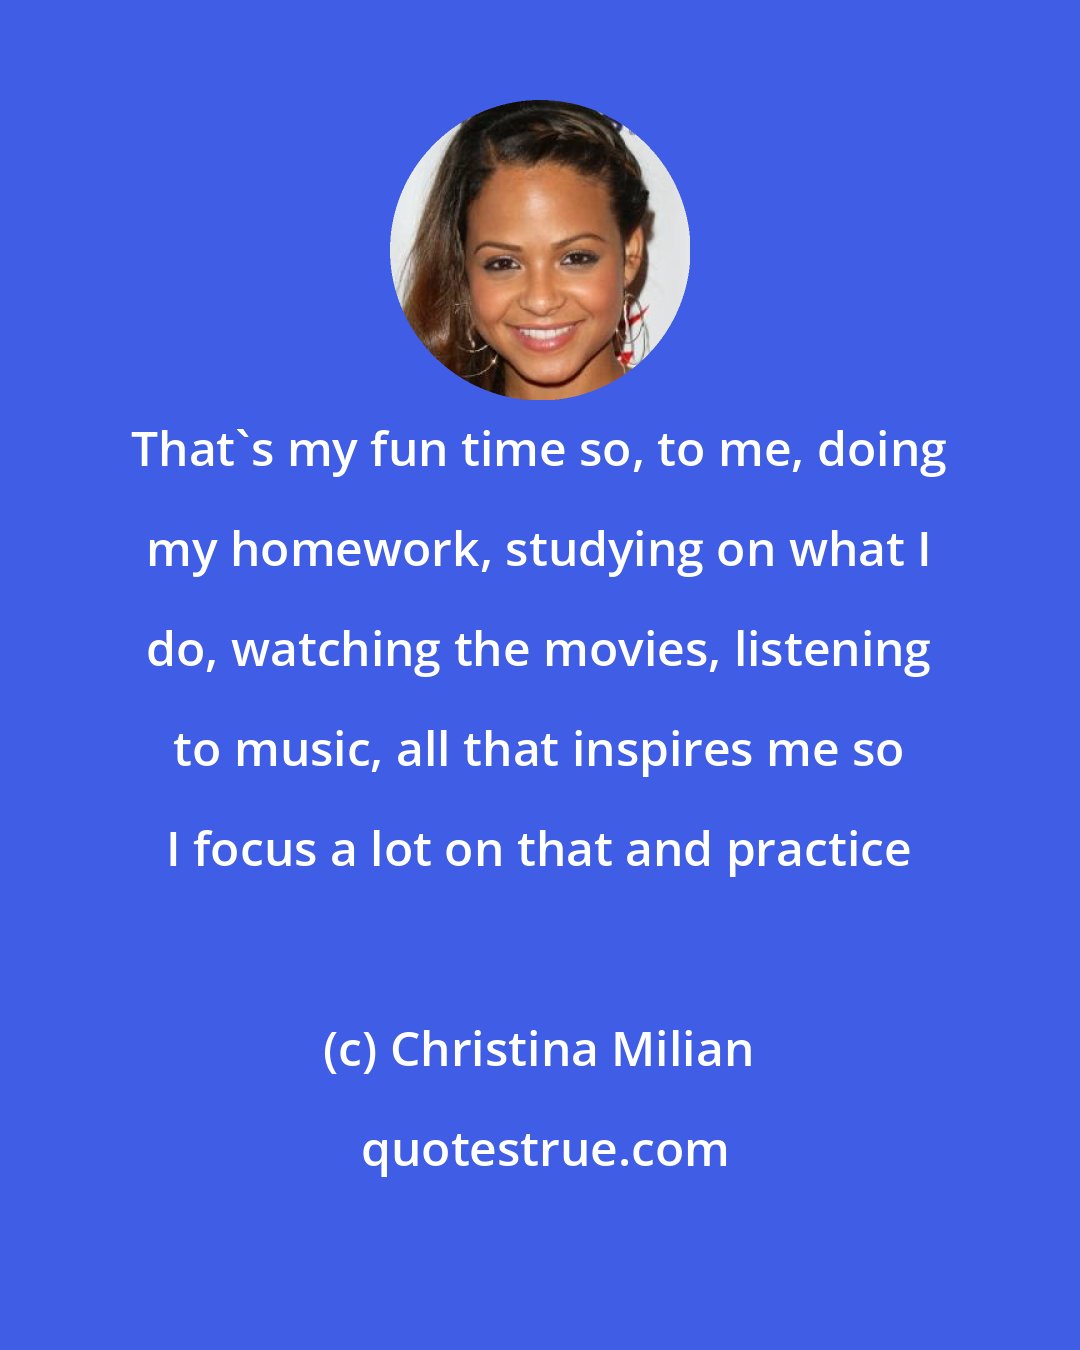 Christina Milian: That's my fun time so, to me, doing my homework, studying on what I do, watching the movies, listening to music, all that inspires me so I focus a lot on that and practice